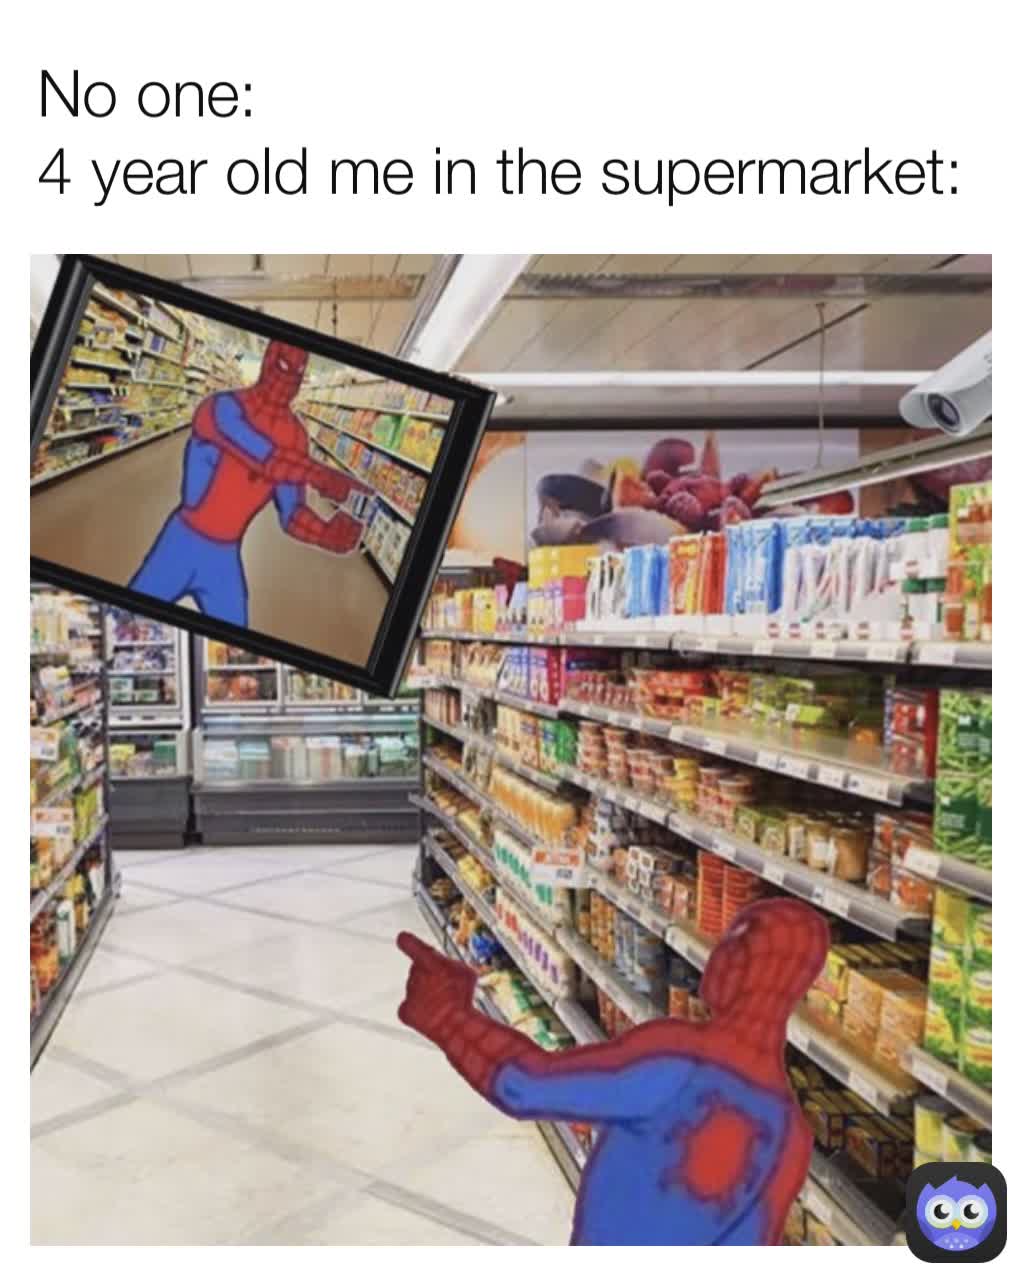 No one:
4 year old me in the supermarket: